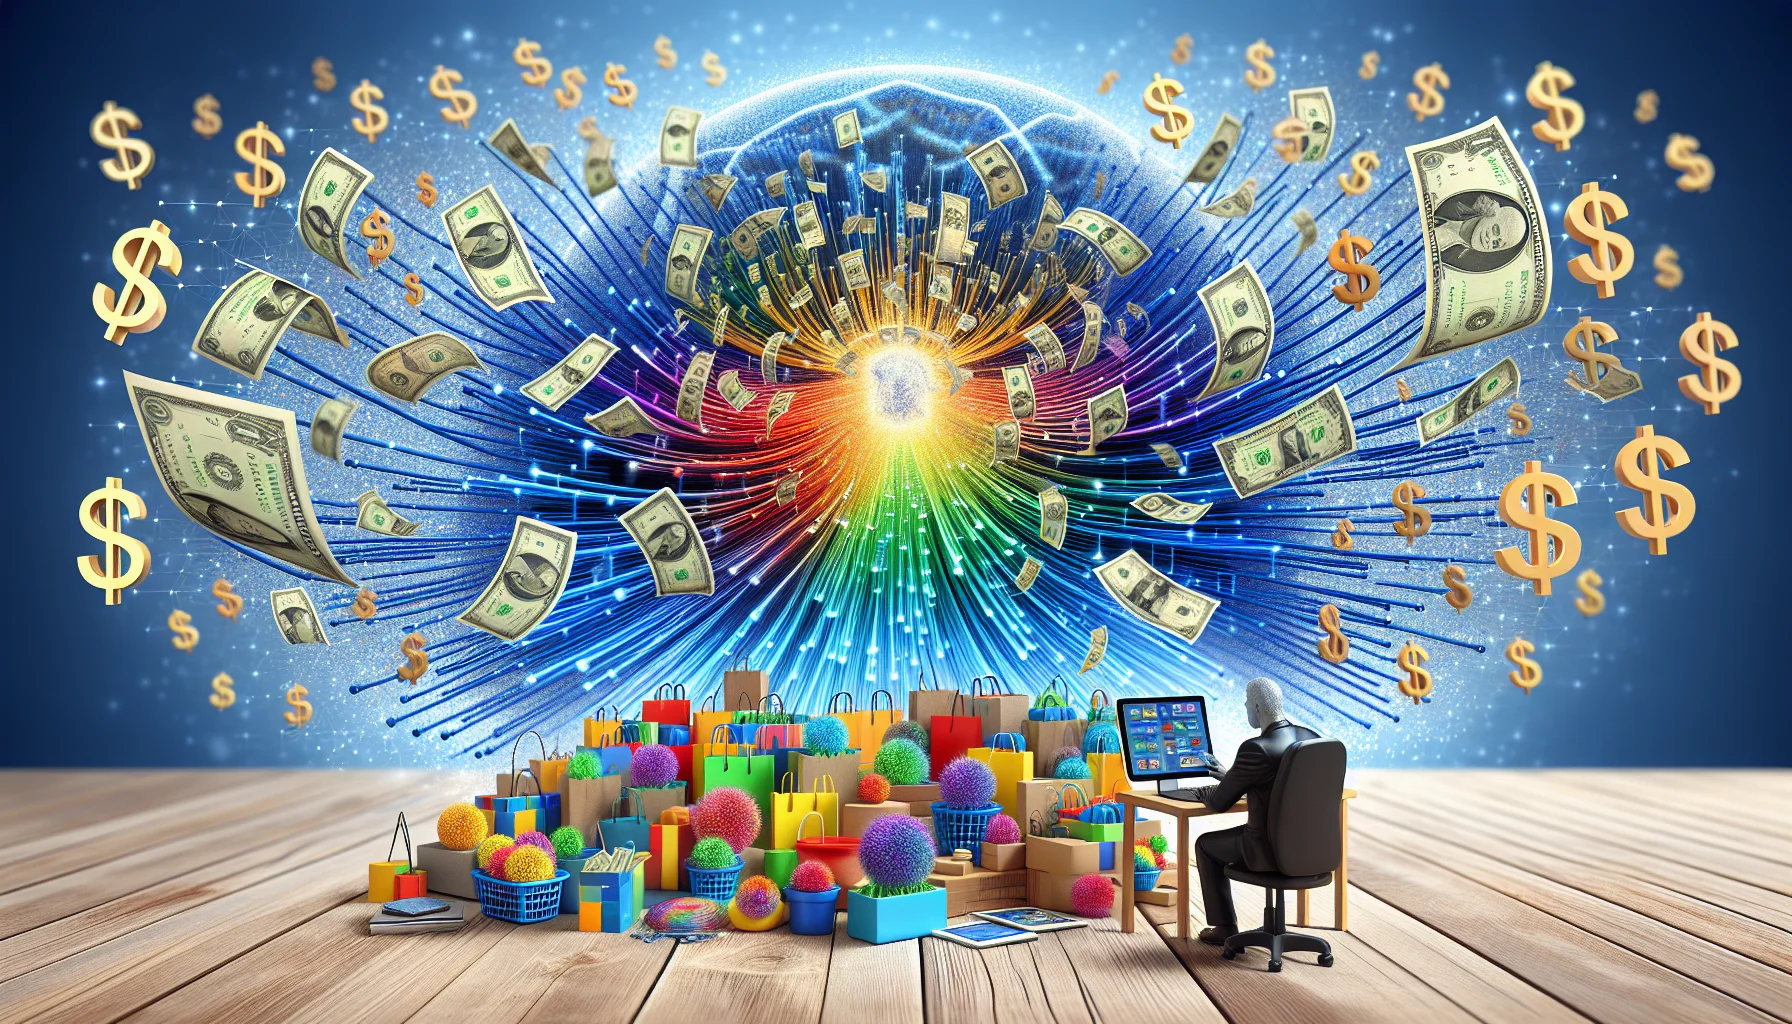 Imagine an entertaining and believable scenario showcasing someone becoming an affiliate of a major international retail chain, reminiscent of Walmart, in a context related to earning an income online. This person could be sitting at their computer, surrounded by a whimsical array of affiliate products, with each available in different shapes and colors form a rainbow pattern. In the background, the abstract concept of the internet is personified as a large, shimmering web of fiber optic cables. Dollar signs are falling from the sky like rain, symbolizing the online profits. The scene captures a light-hearted and optimistic view of affiliate partnerships and e-commerce earnings.